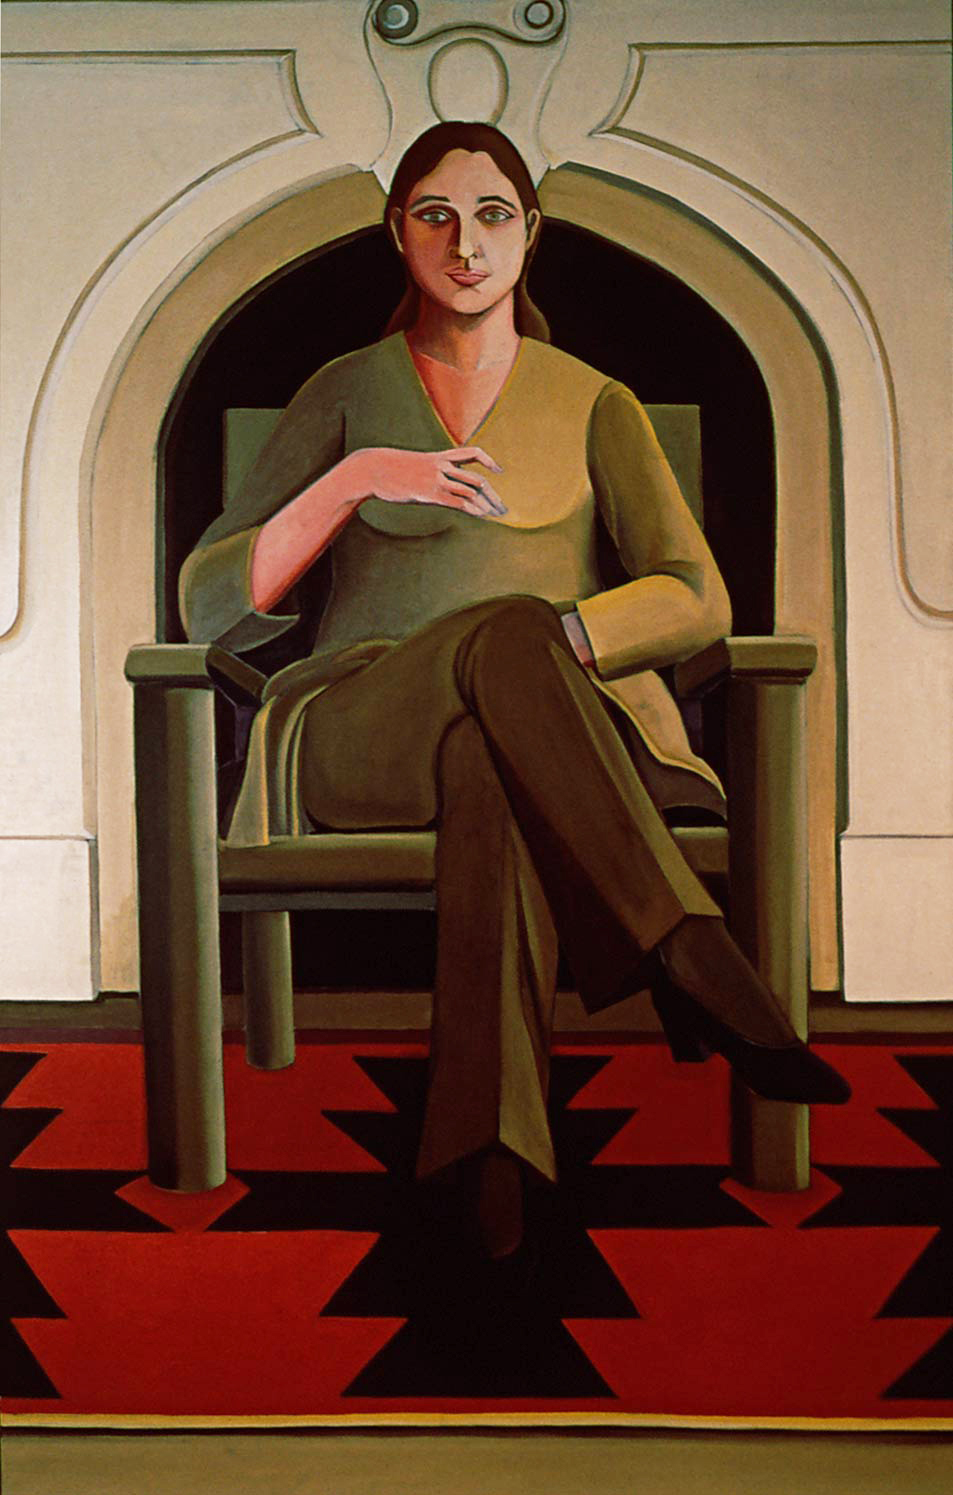 Thumbnail of Self Portrait New York Fireplace, Painting by Ethel Fisher of the artist in her New York studio, 1969, oil on linen, 68 x 42 inches, mid-twentieth century figure painting.